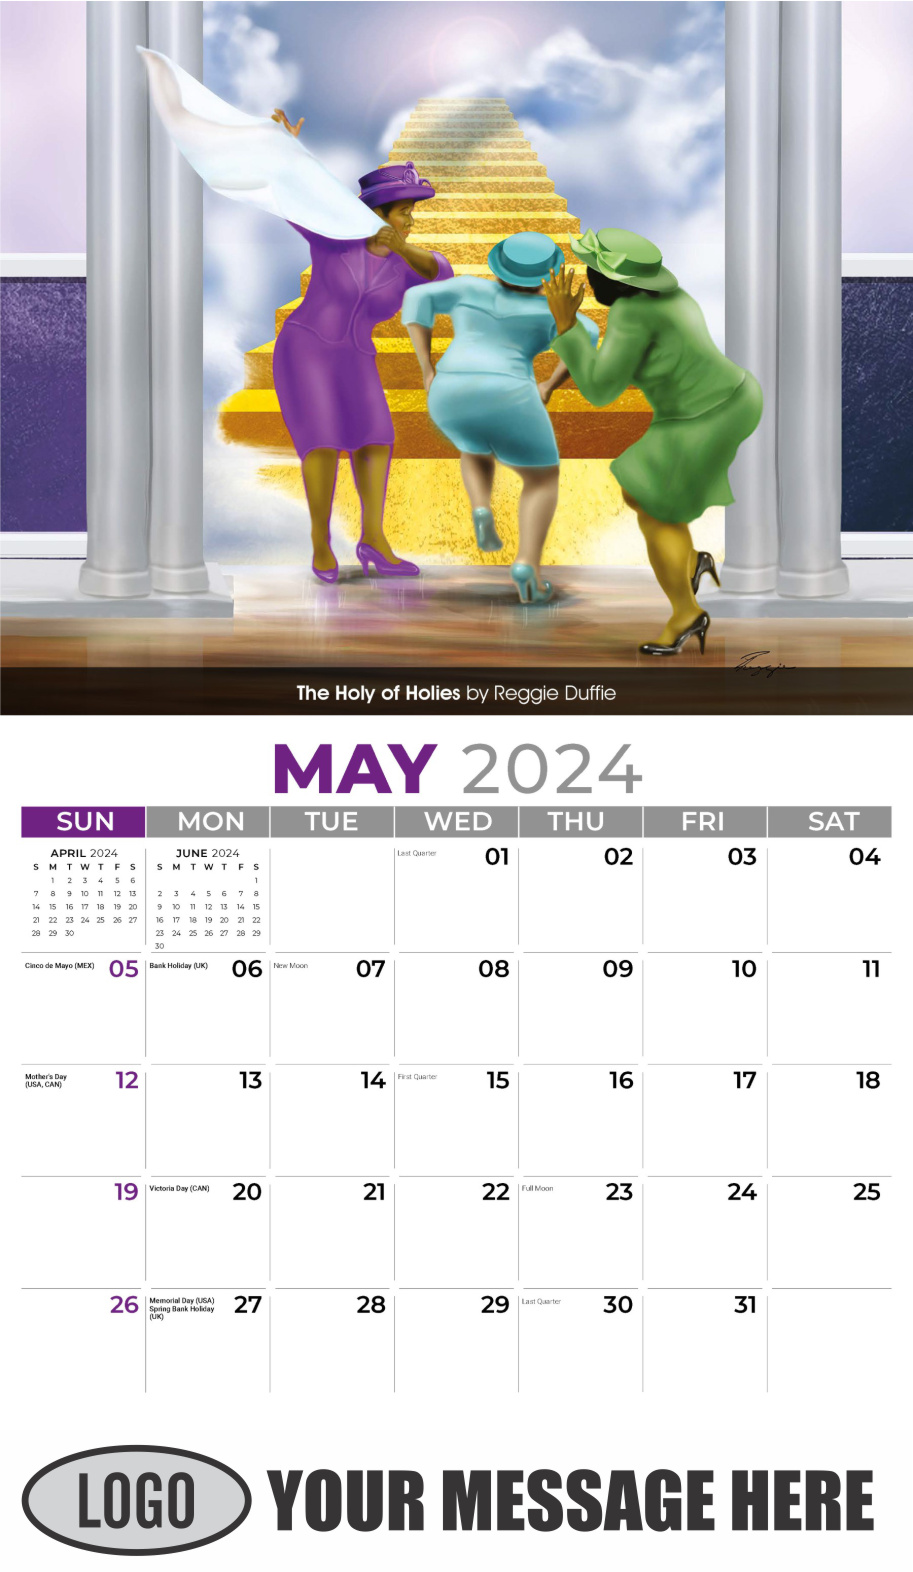 Celebration of African American Art 2024 Business Promotional Calendar - May